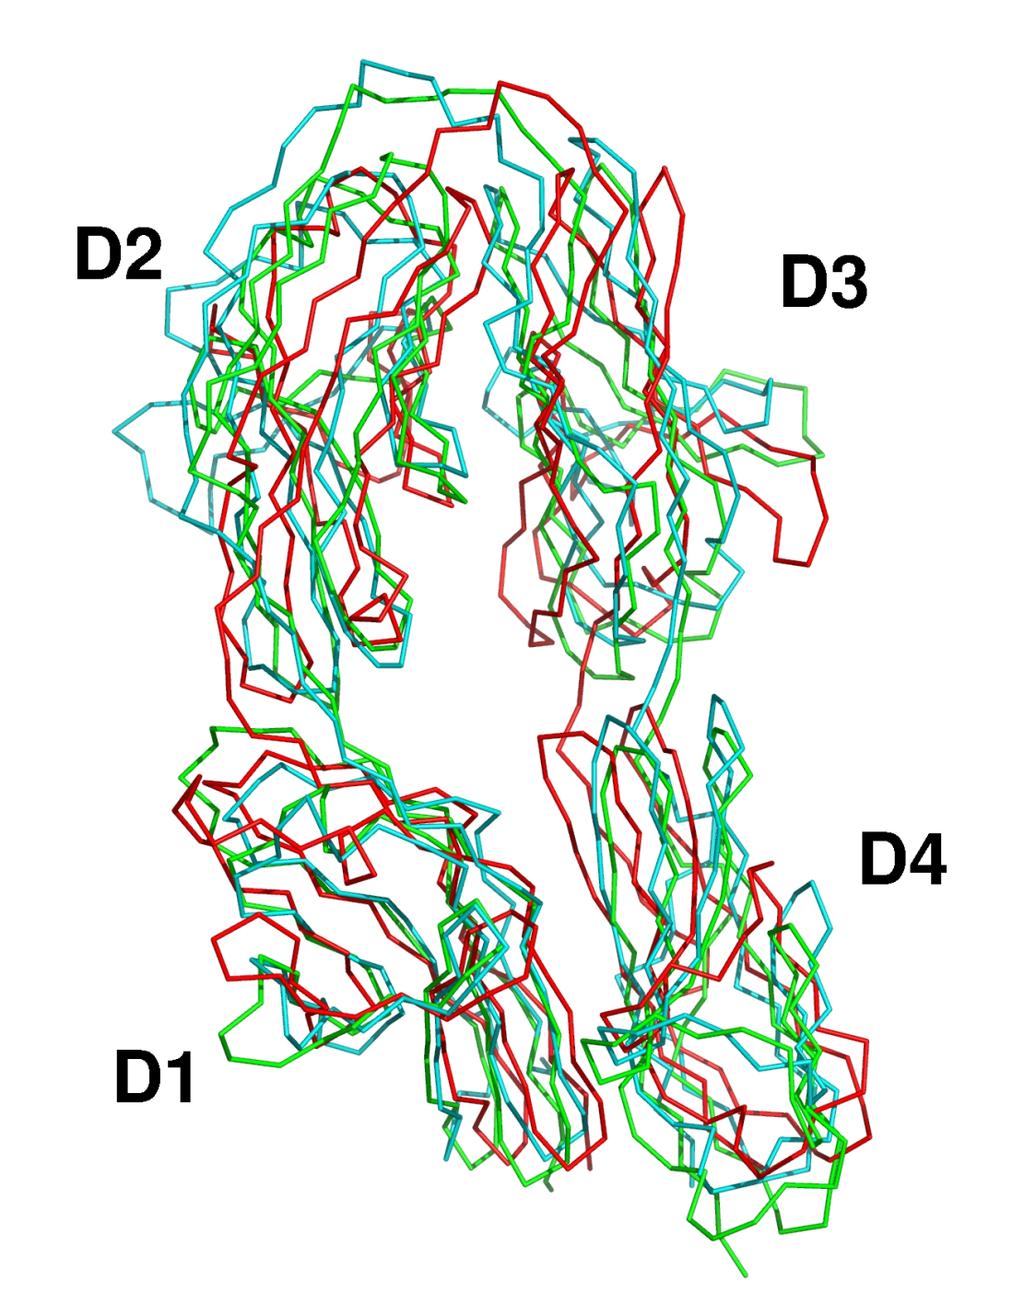 The interface of axonin is superimposed in b, and residues contributed to the interface are colored cyan when belonging to axonin and red when belonging to Dscam.